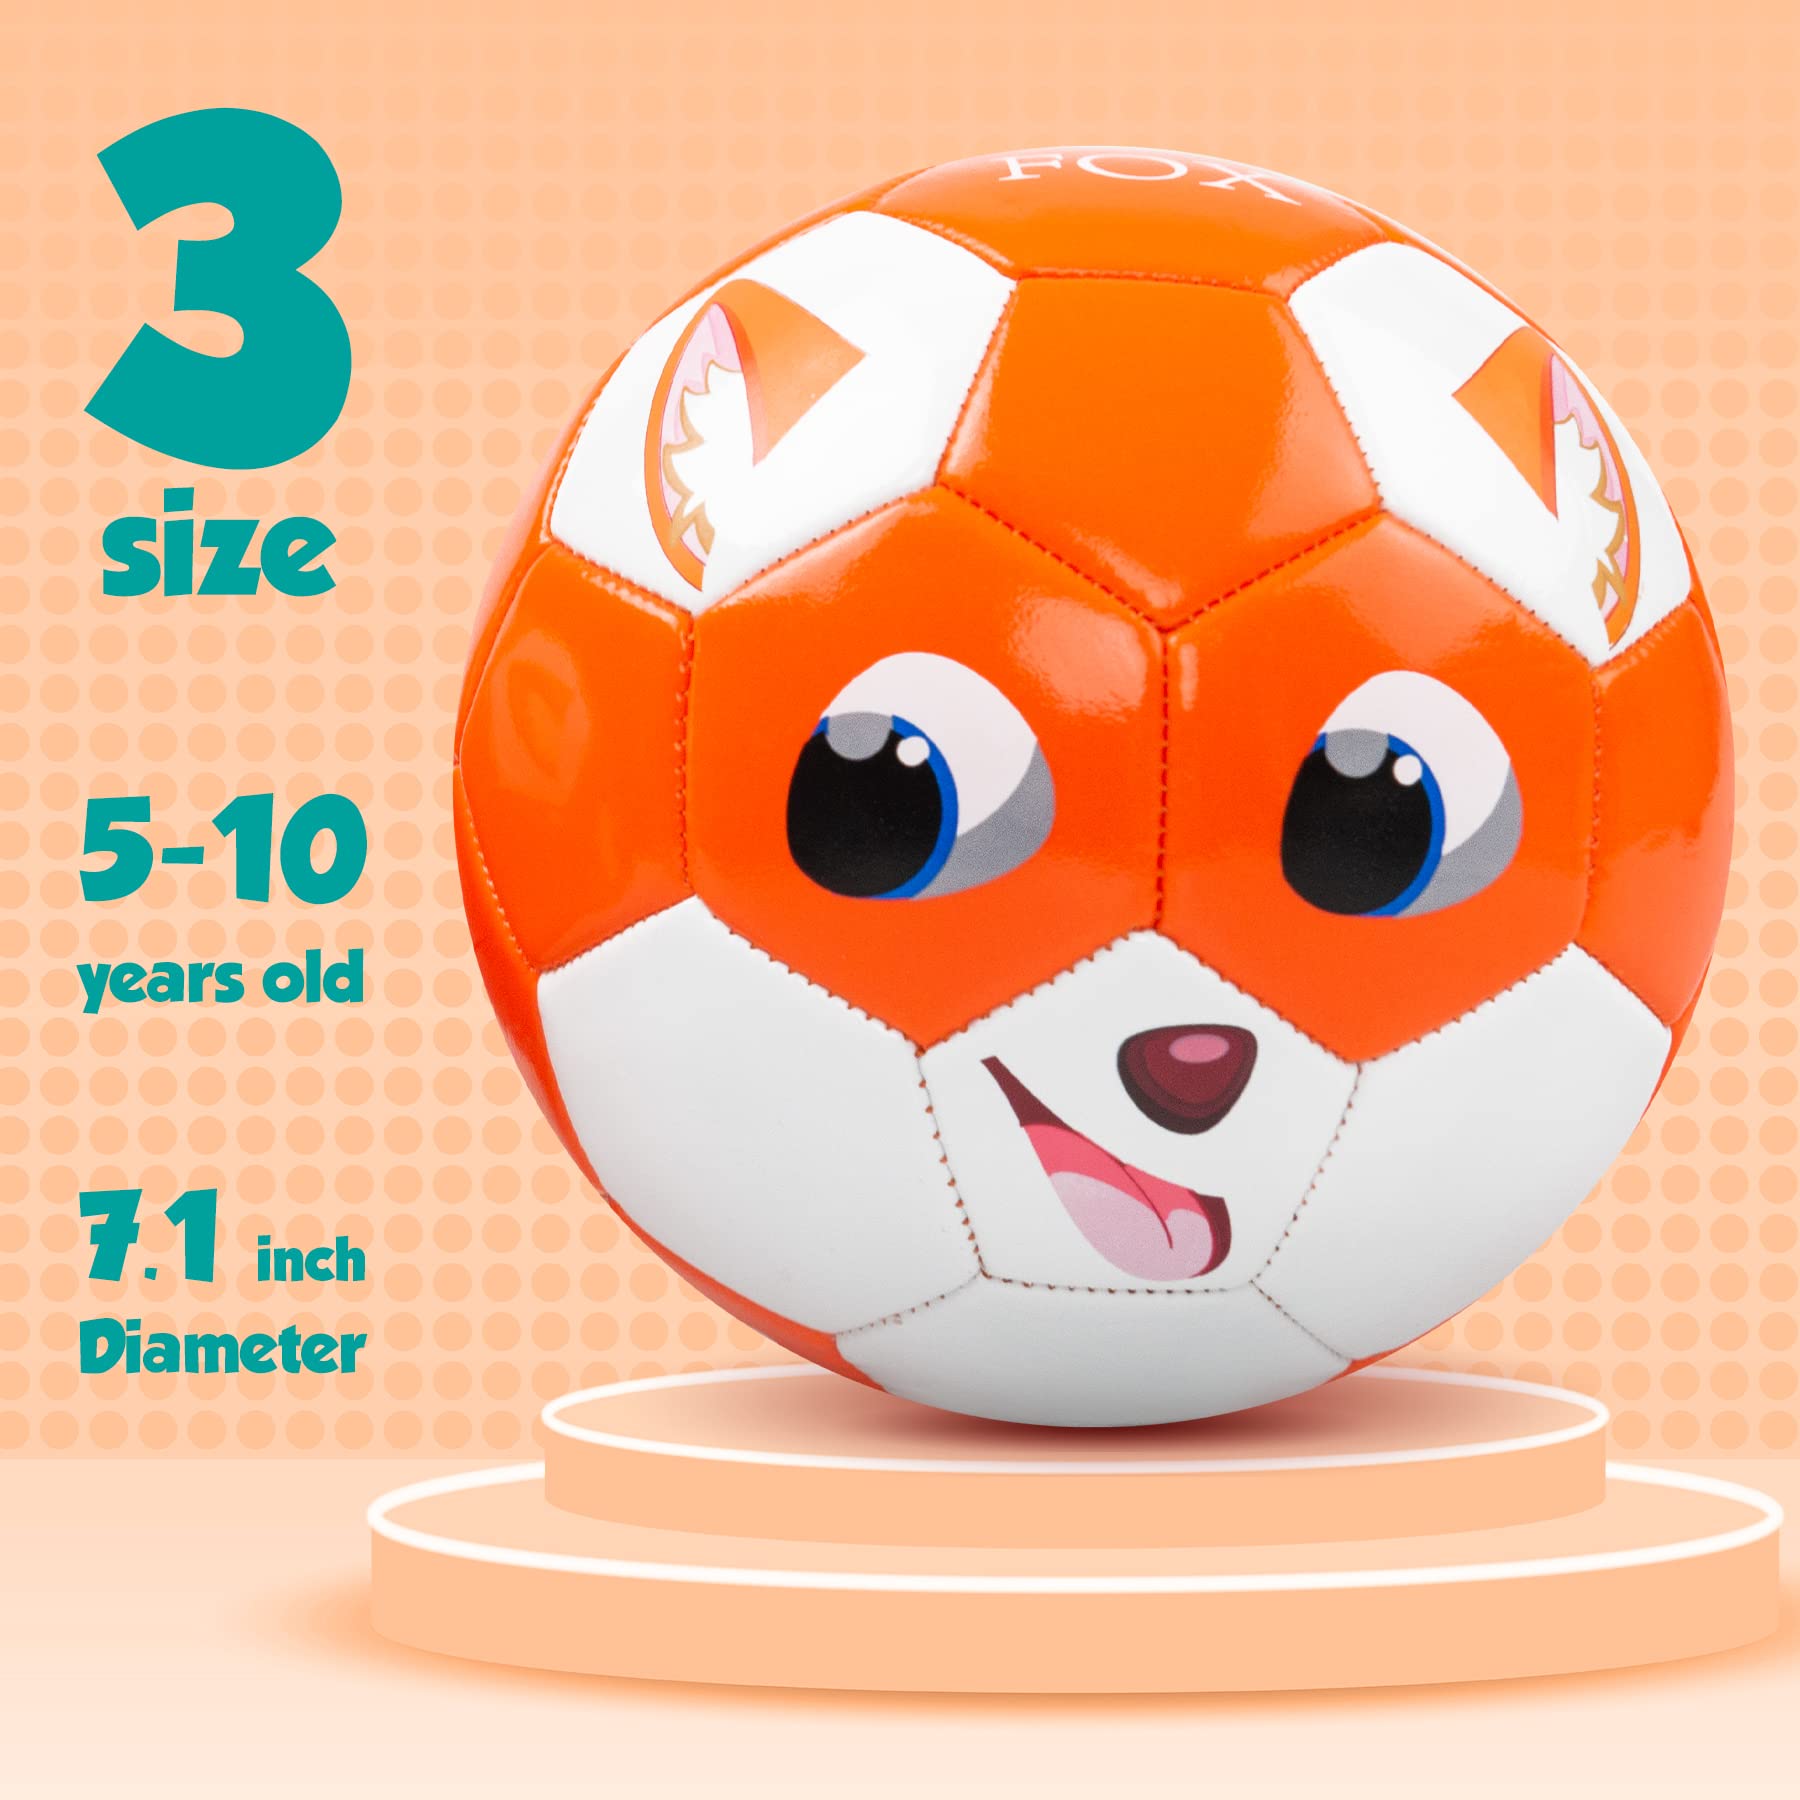 EVERICH TOY Soccer Ball Size 2 Soccer Balls for Kids-Sport Ball for Toddlers-Backyard Lawn Sand Outdoor Toys for Boys and Girls,Including Pump